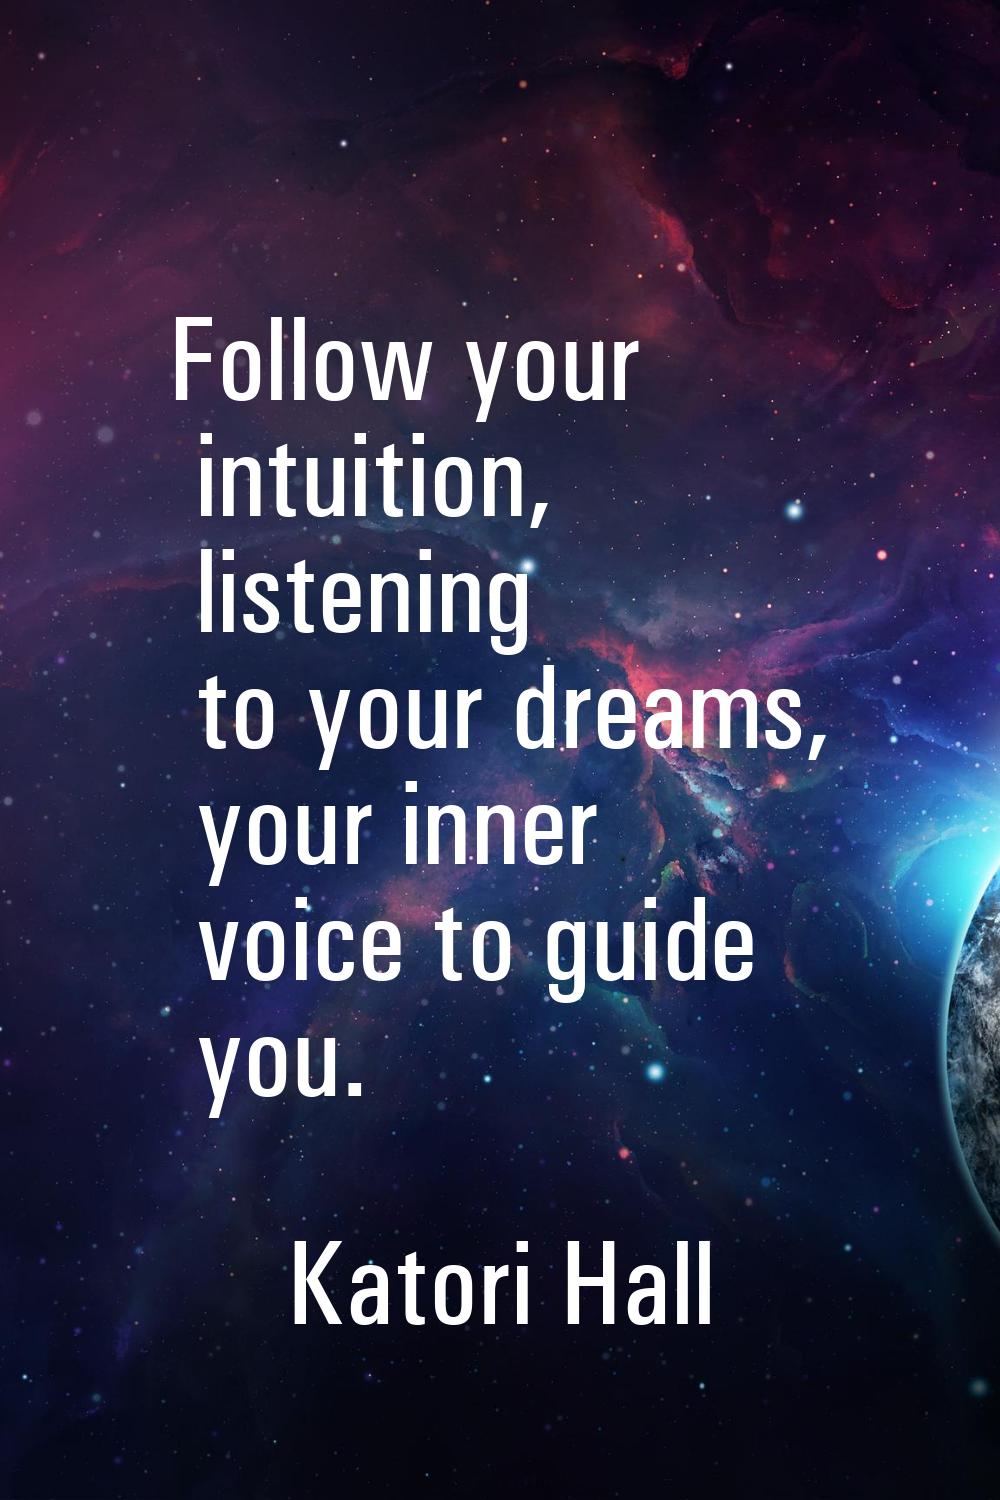 Follow your intuition, listening to your dreams, your inner voice to guide you.